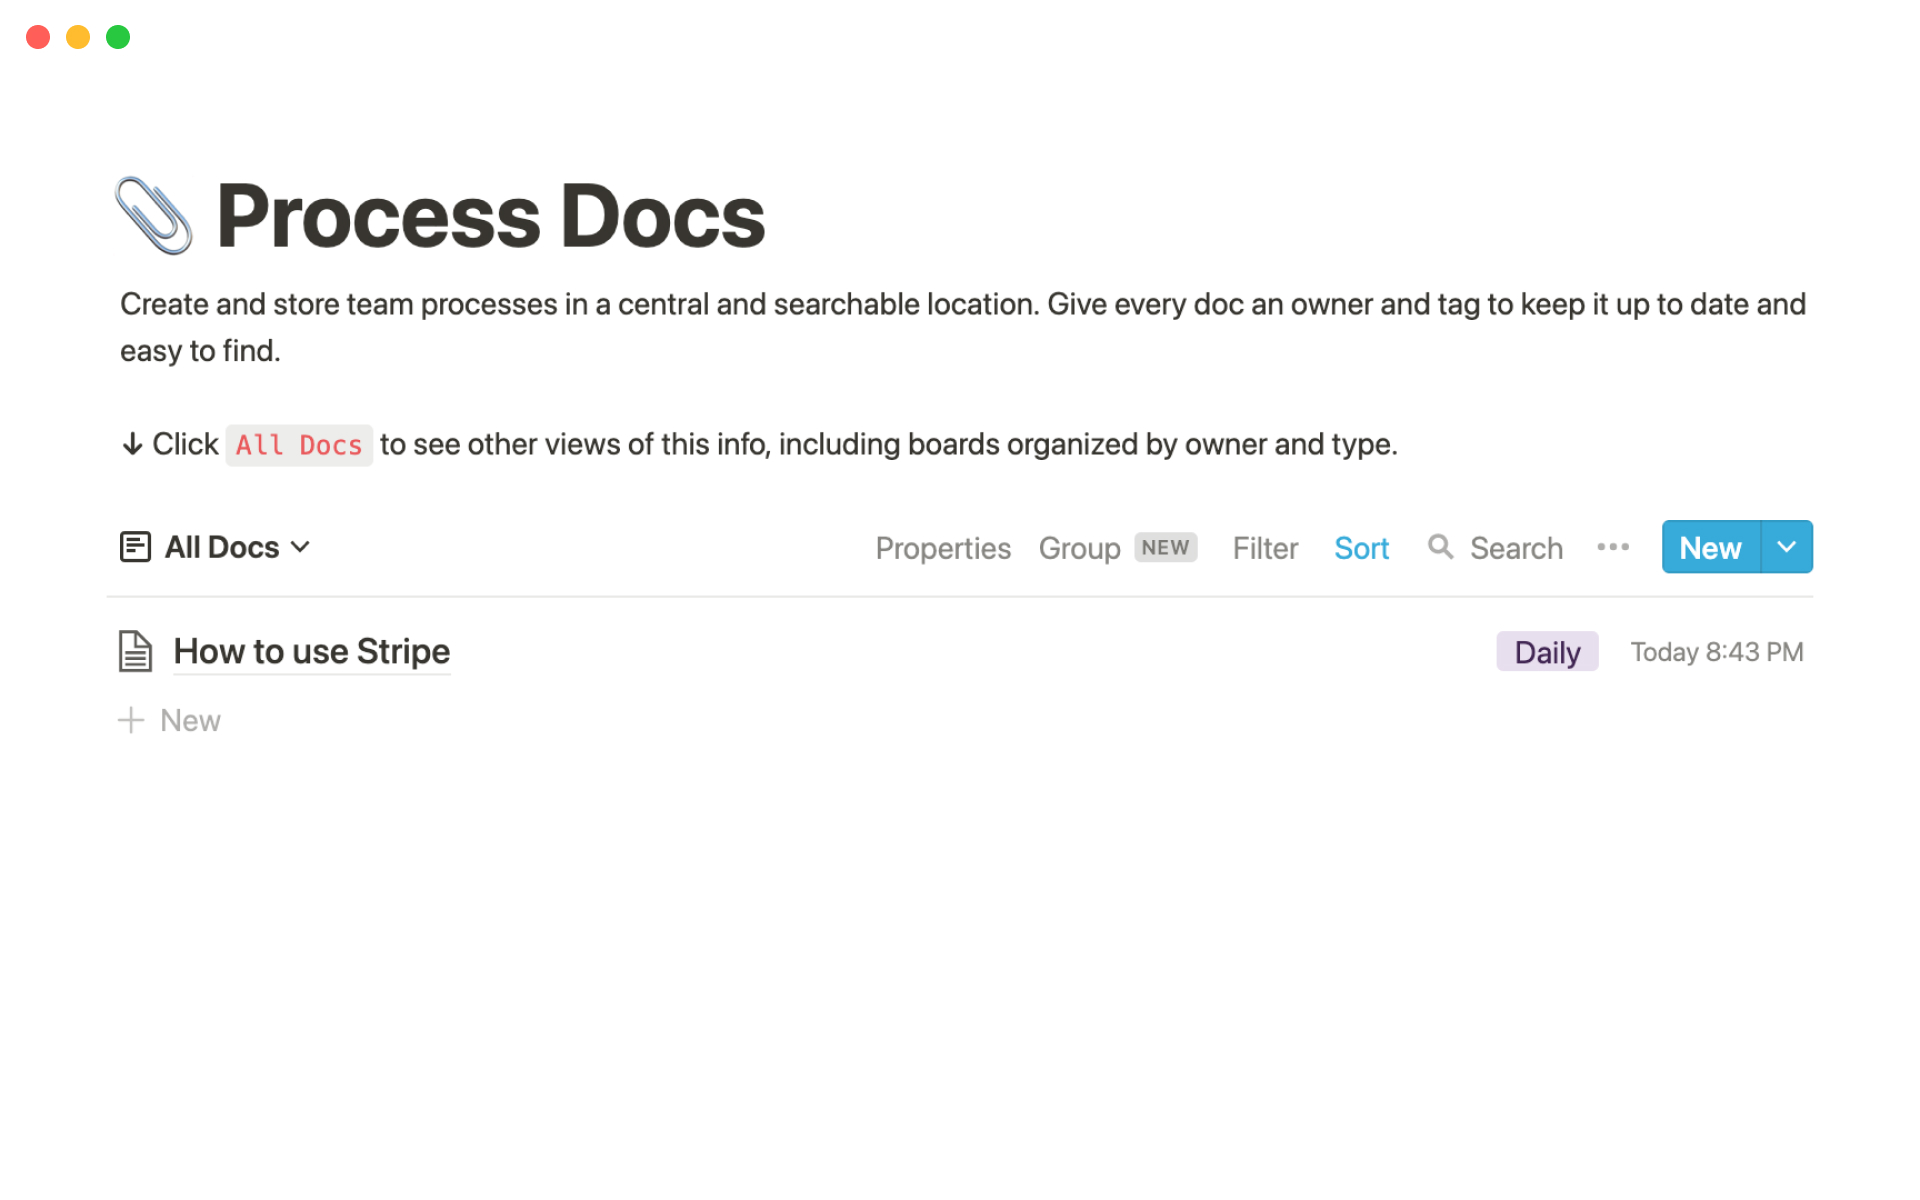 The desktop image for the Process Docs template